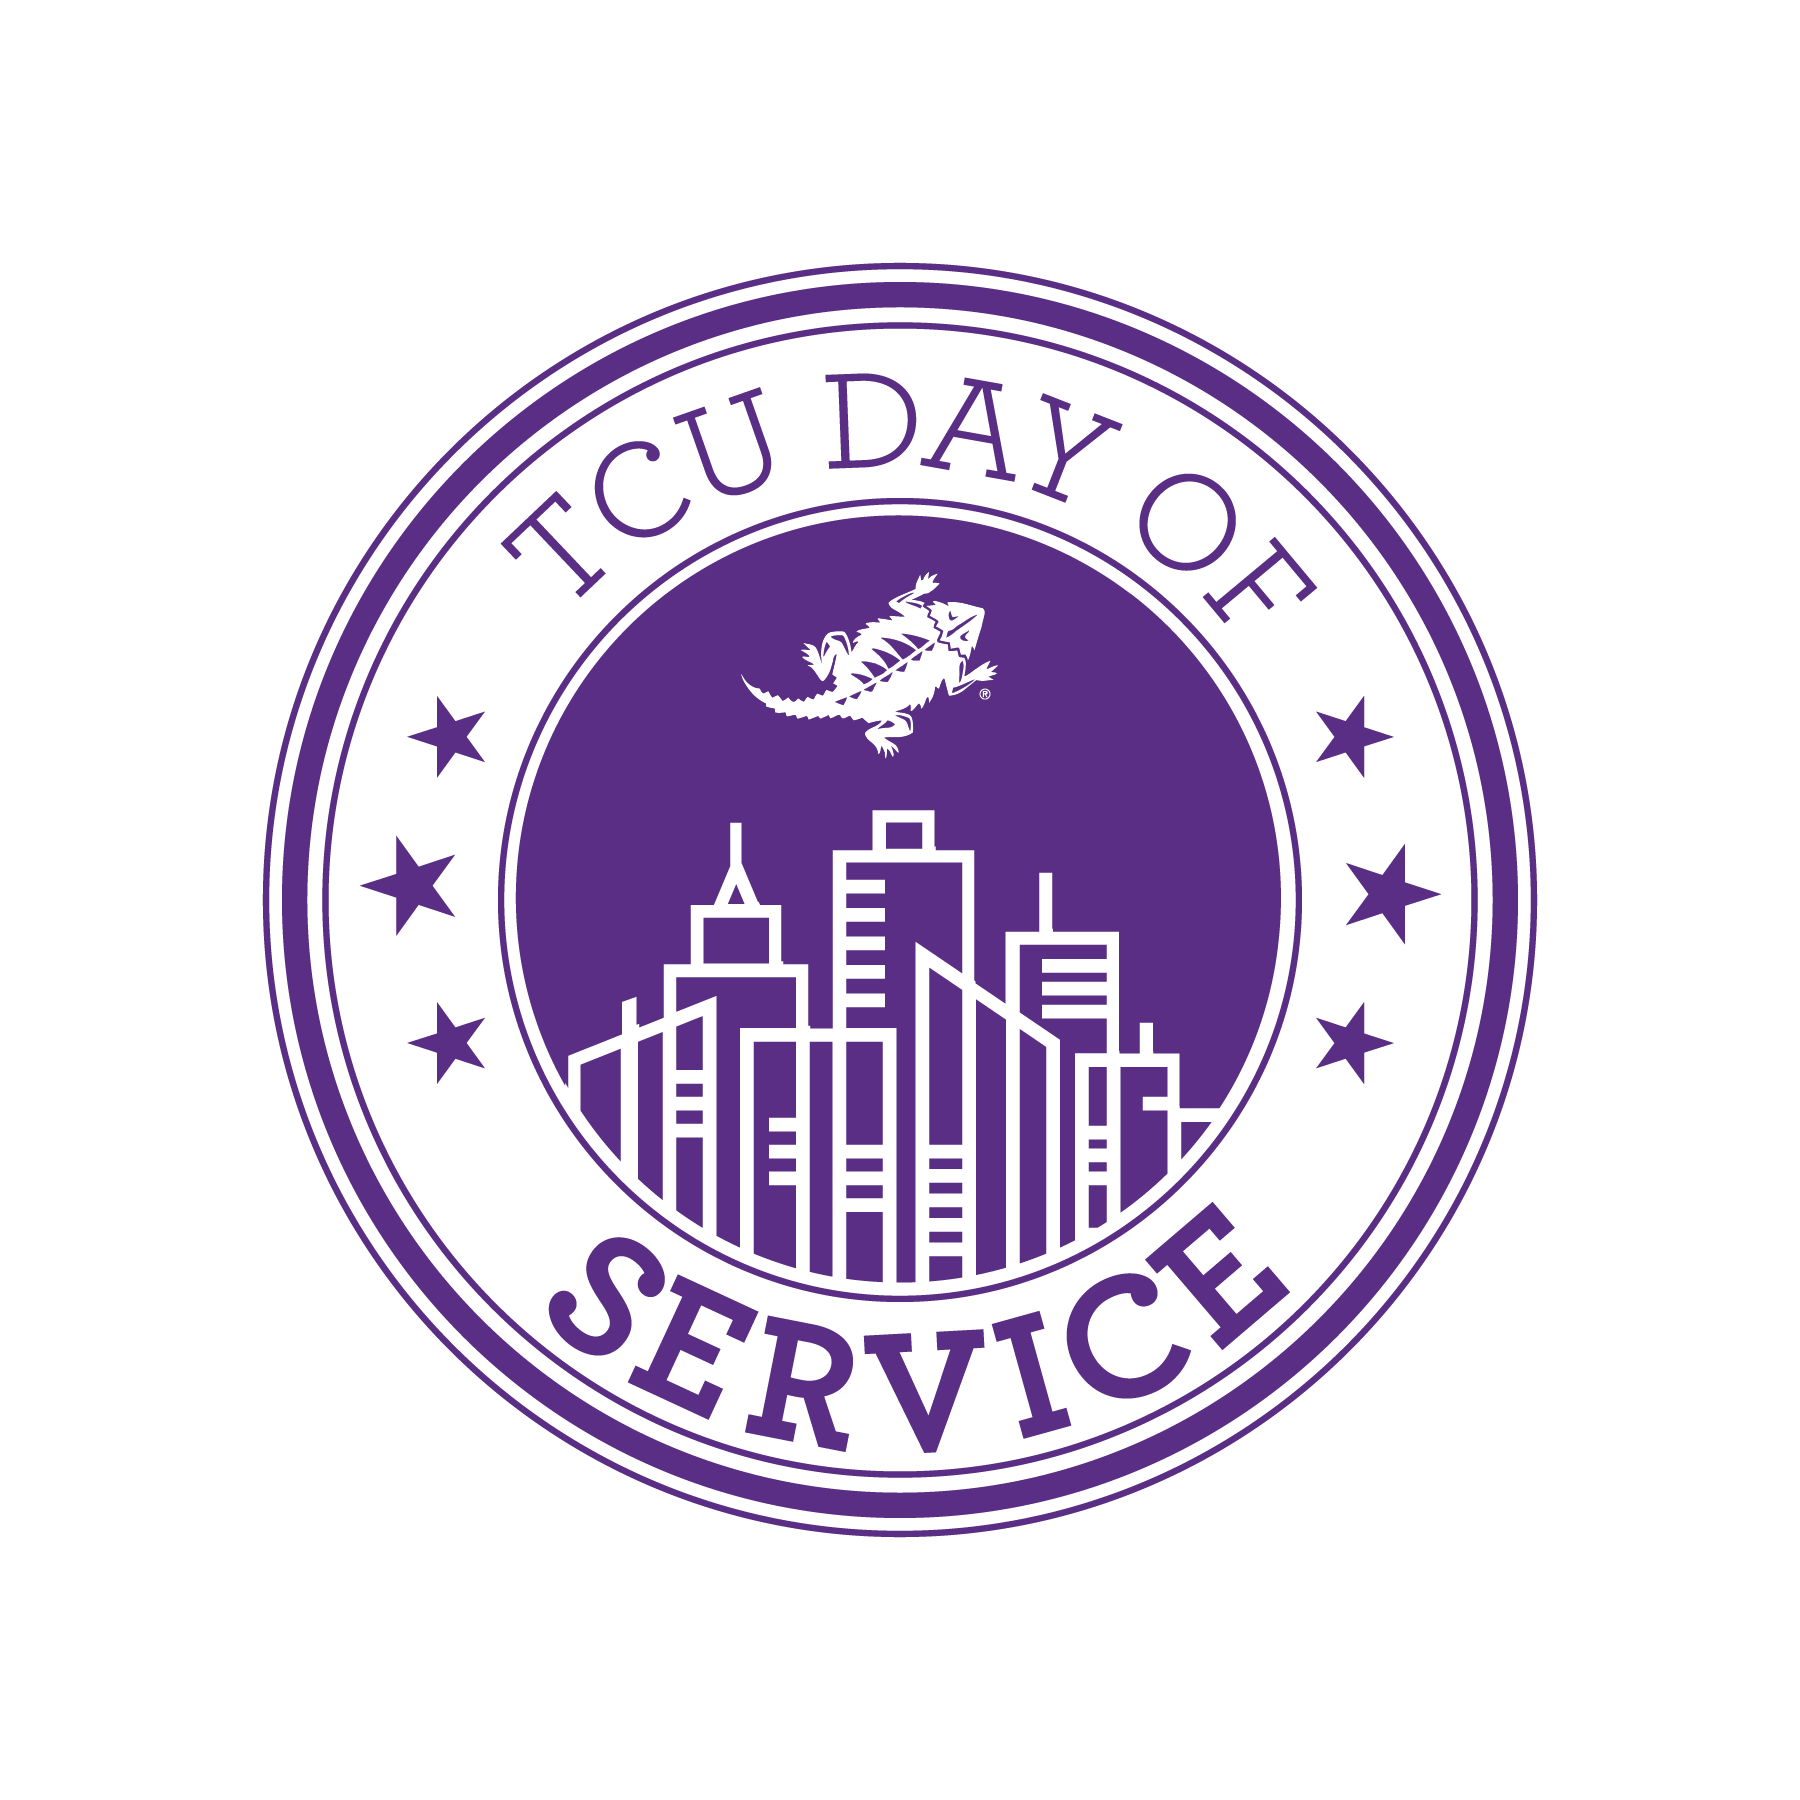 Day of Service - Purple